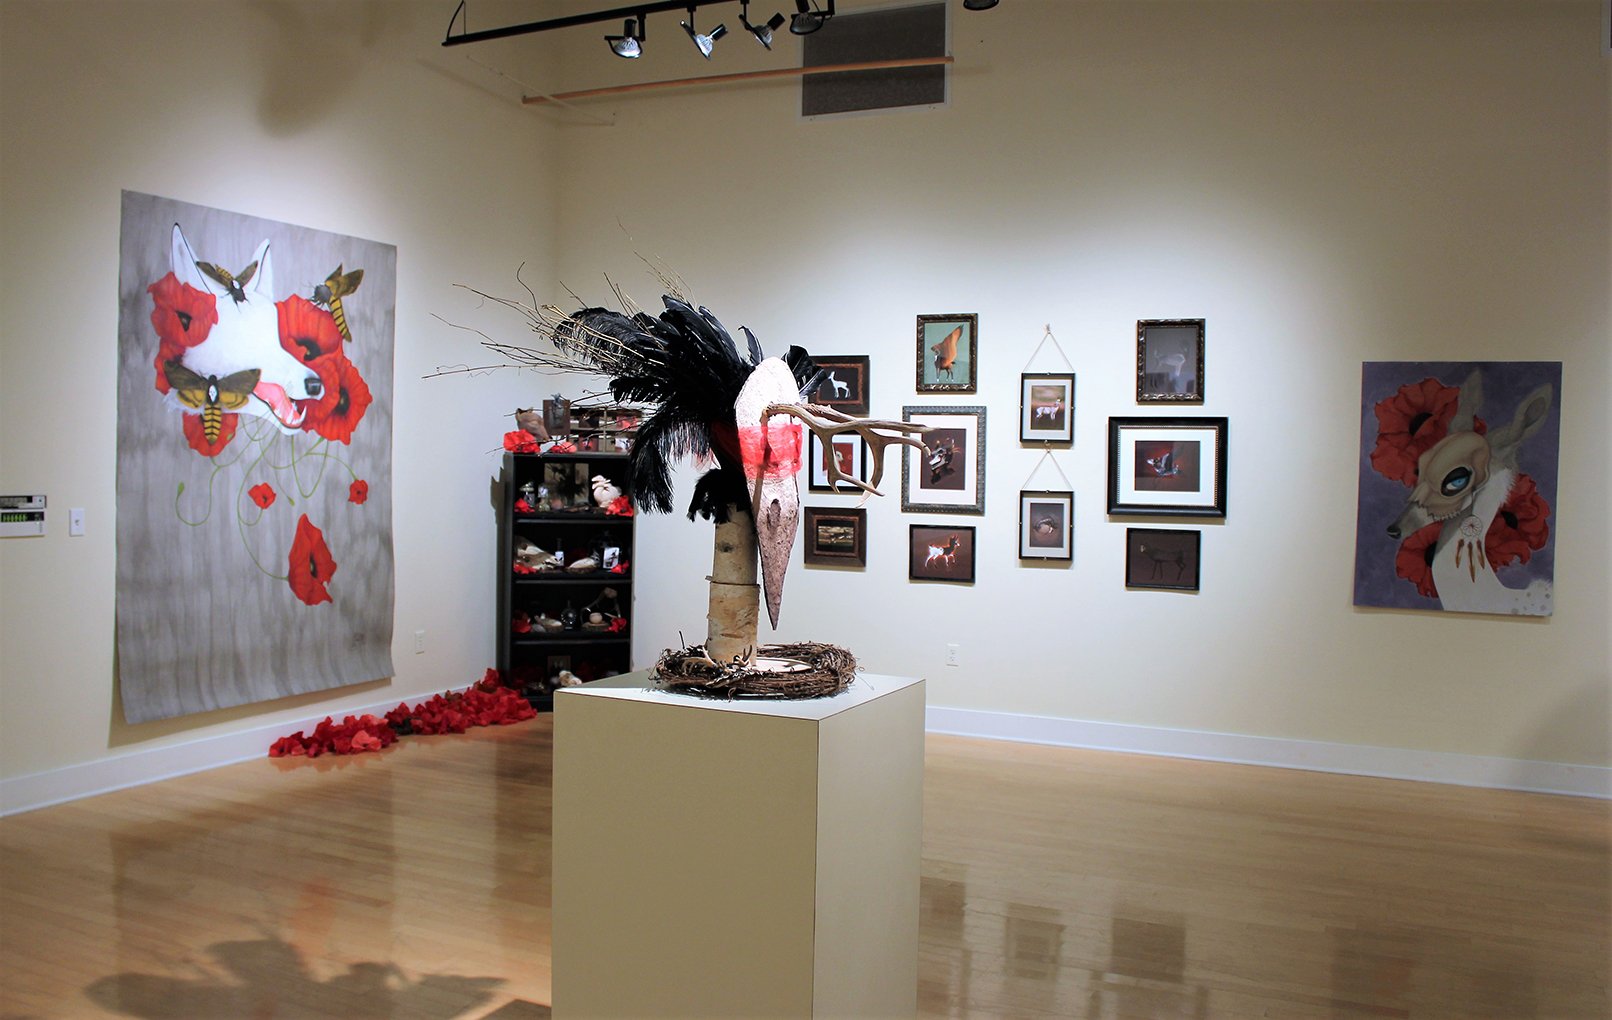  Installation at the Scarfone/Hartley Gallery during the HUMANATURE University of Tampa Arts Senior Exhibition. 